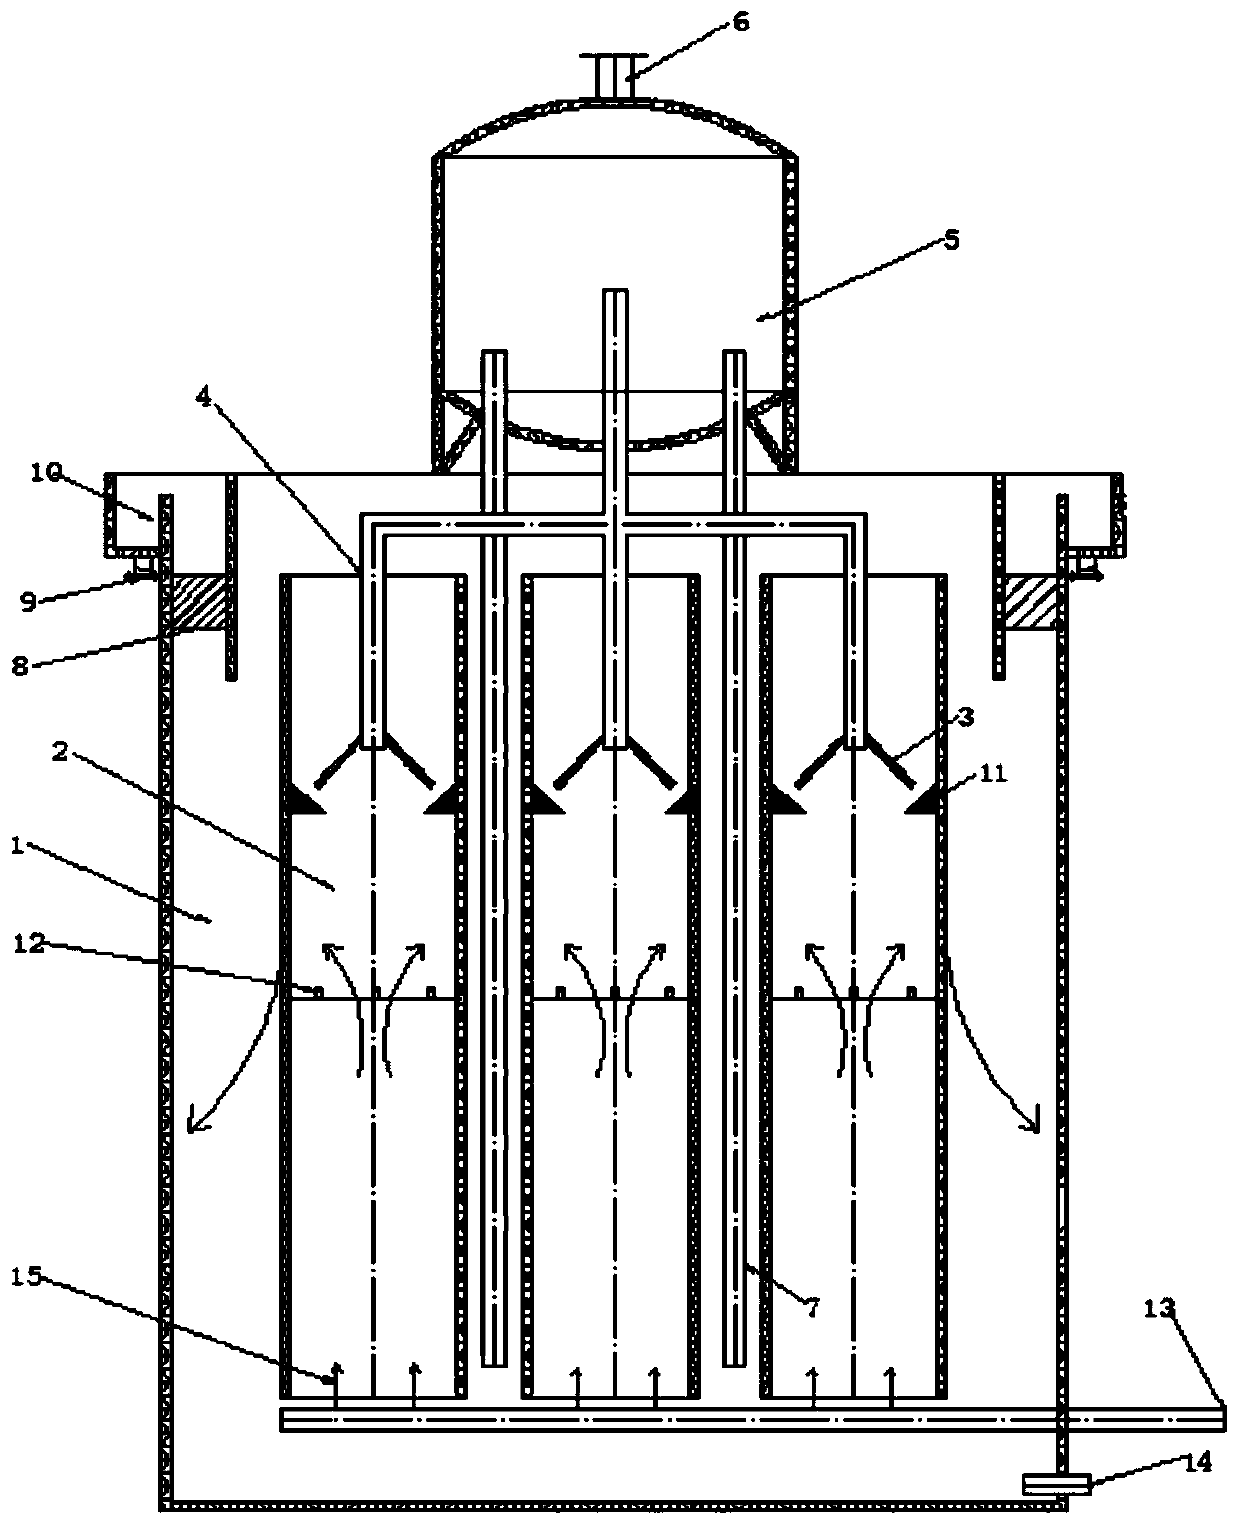 A fully mixed mbbr reactor